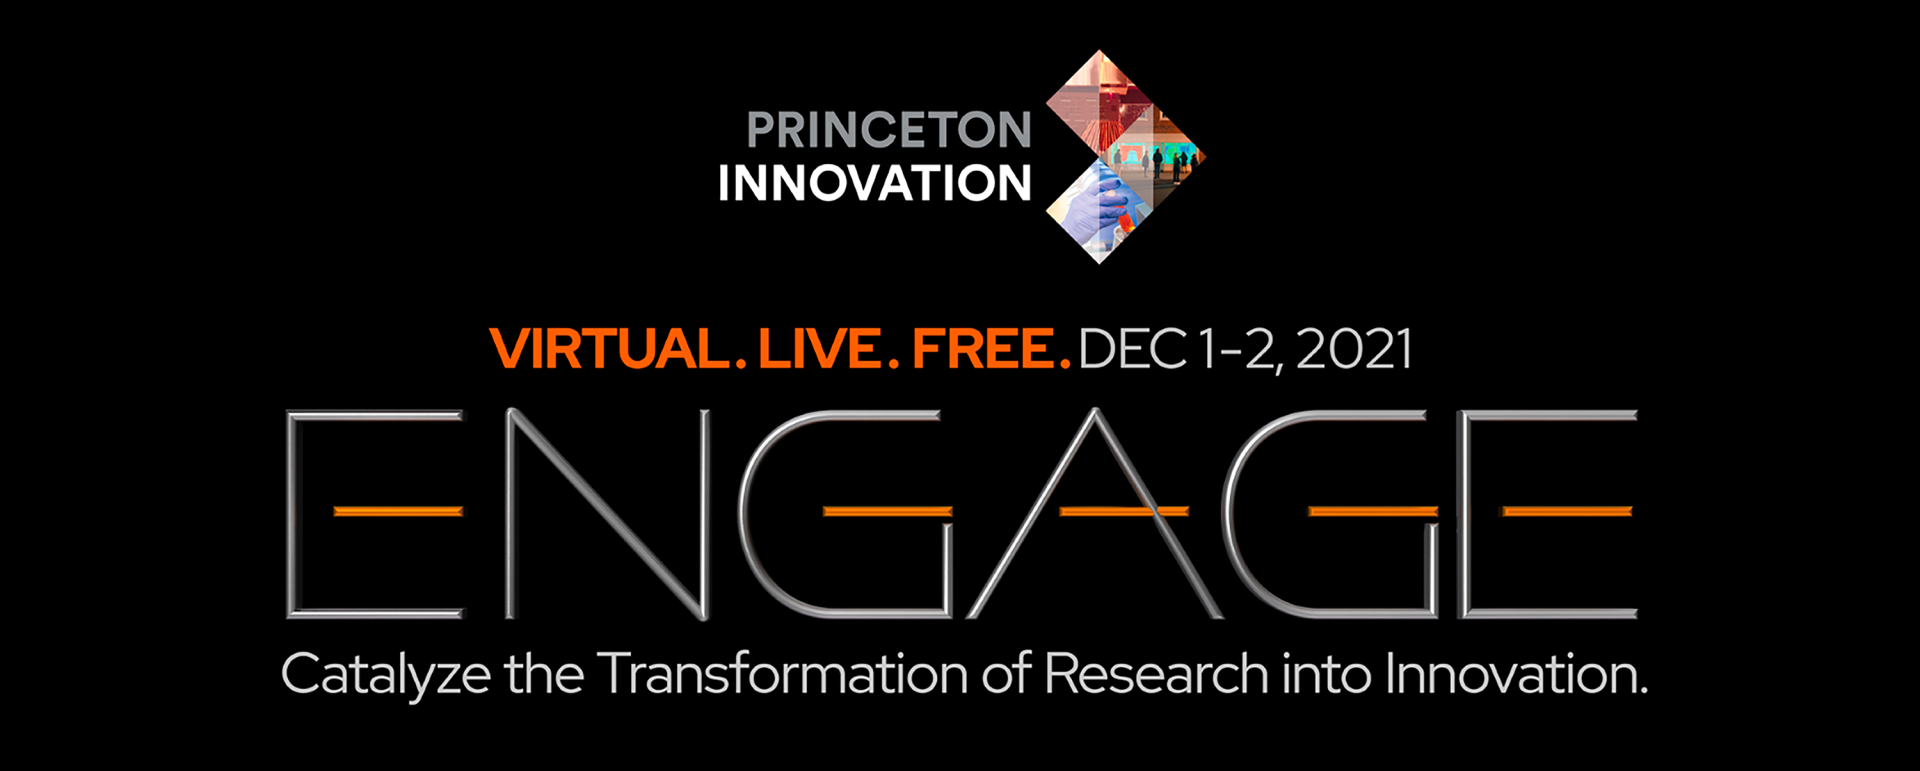 Princeton Innovation ~ ENGAGE: Catalyze the Transformation of Research into Innovation ~ Virtual. Live. Free. Dec 1-2, 2021